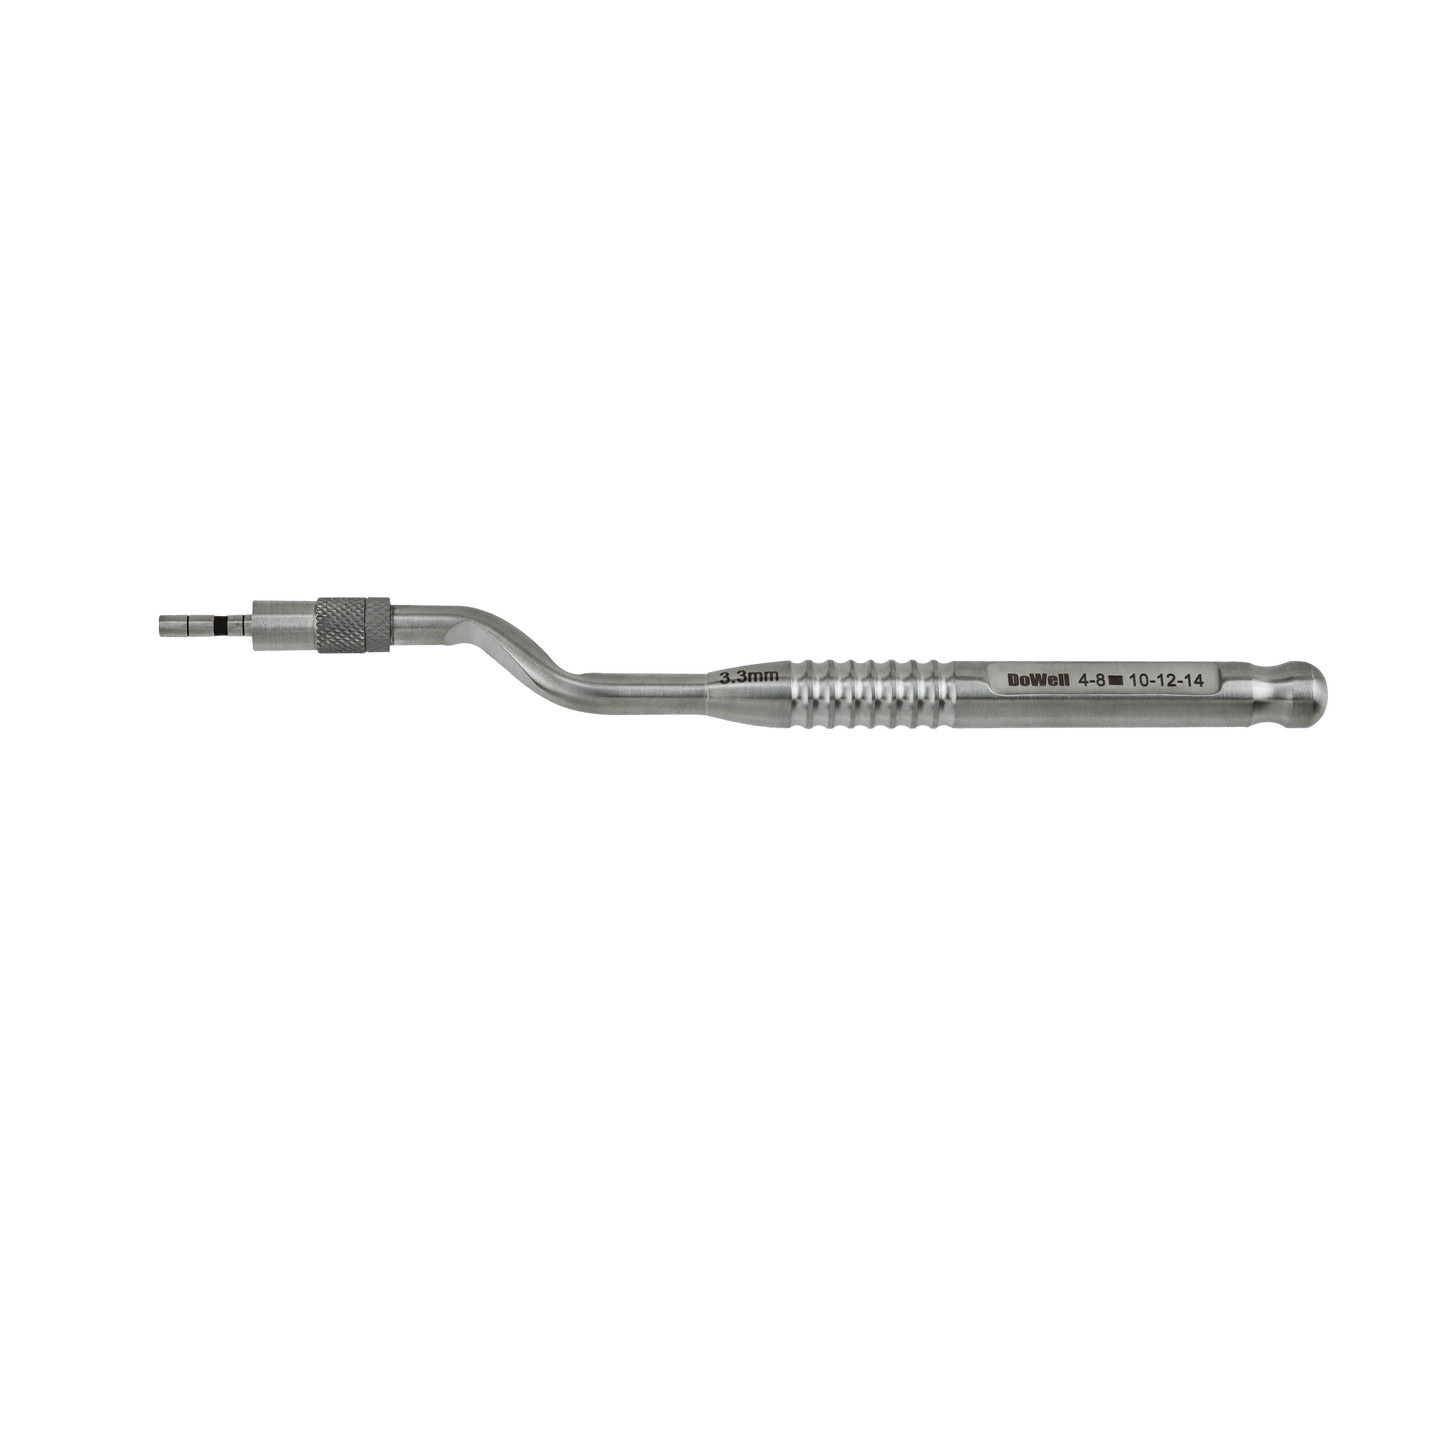 Osteotome 3.3mm - Curved